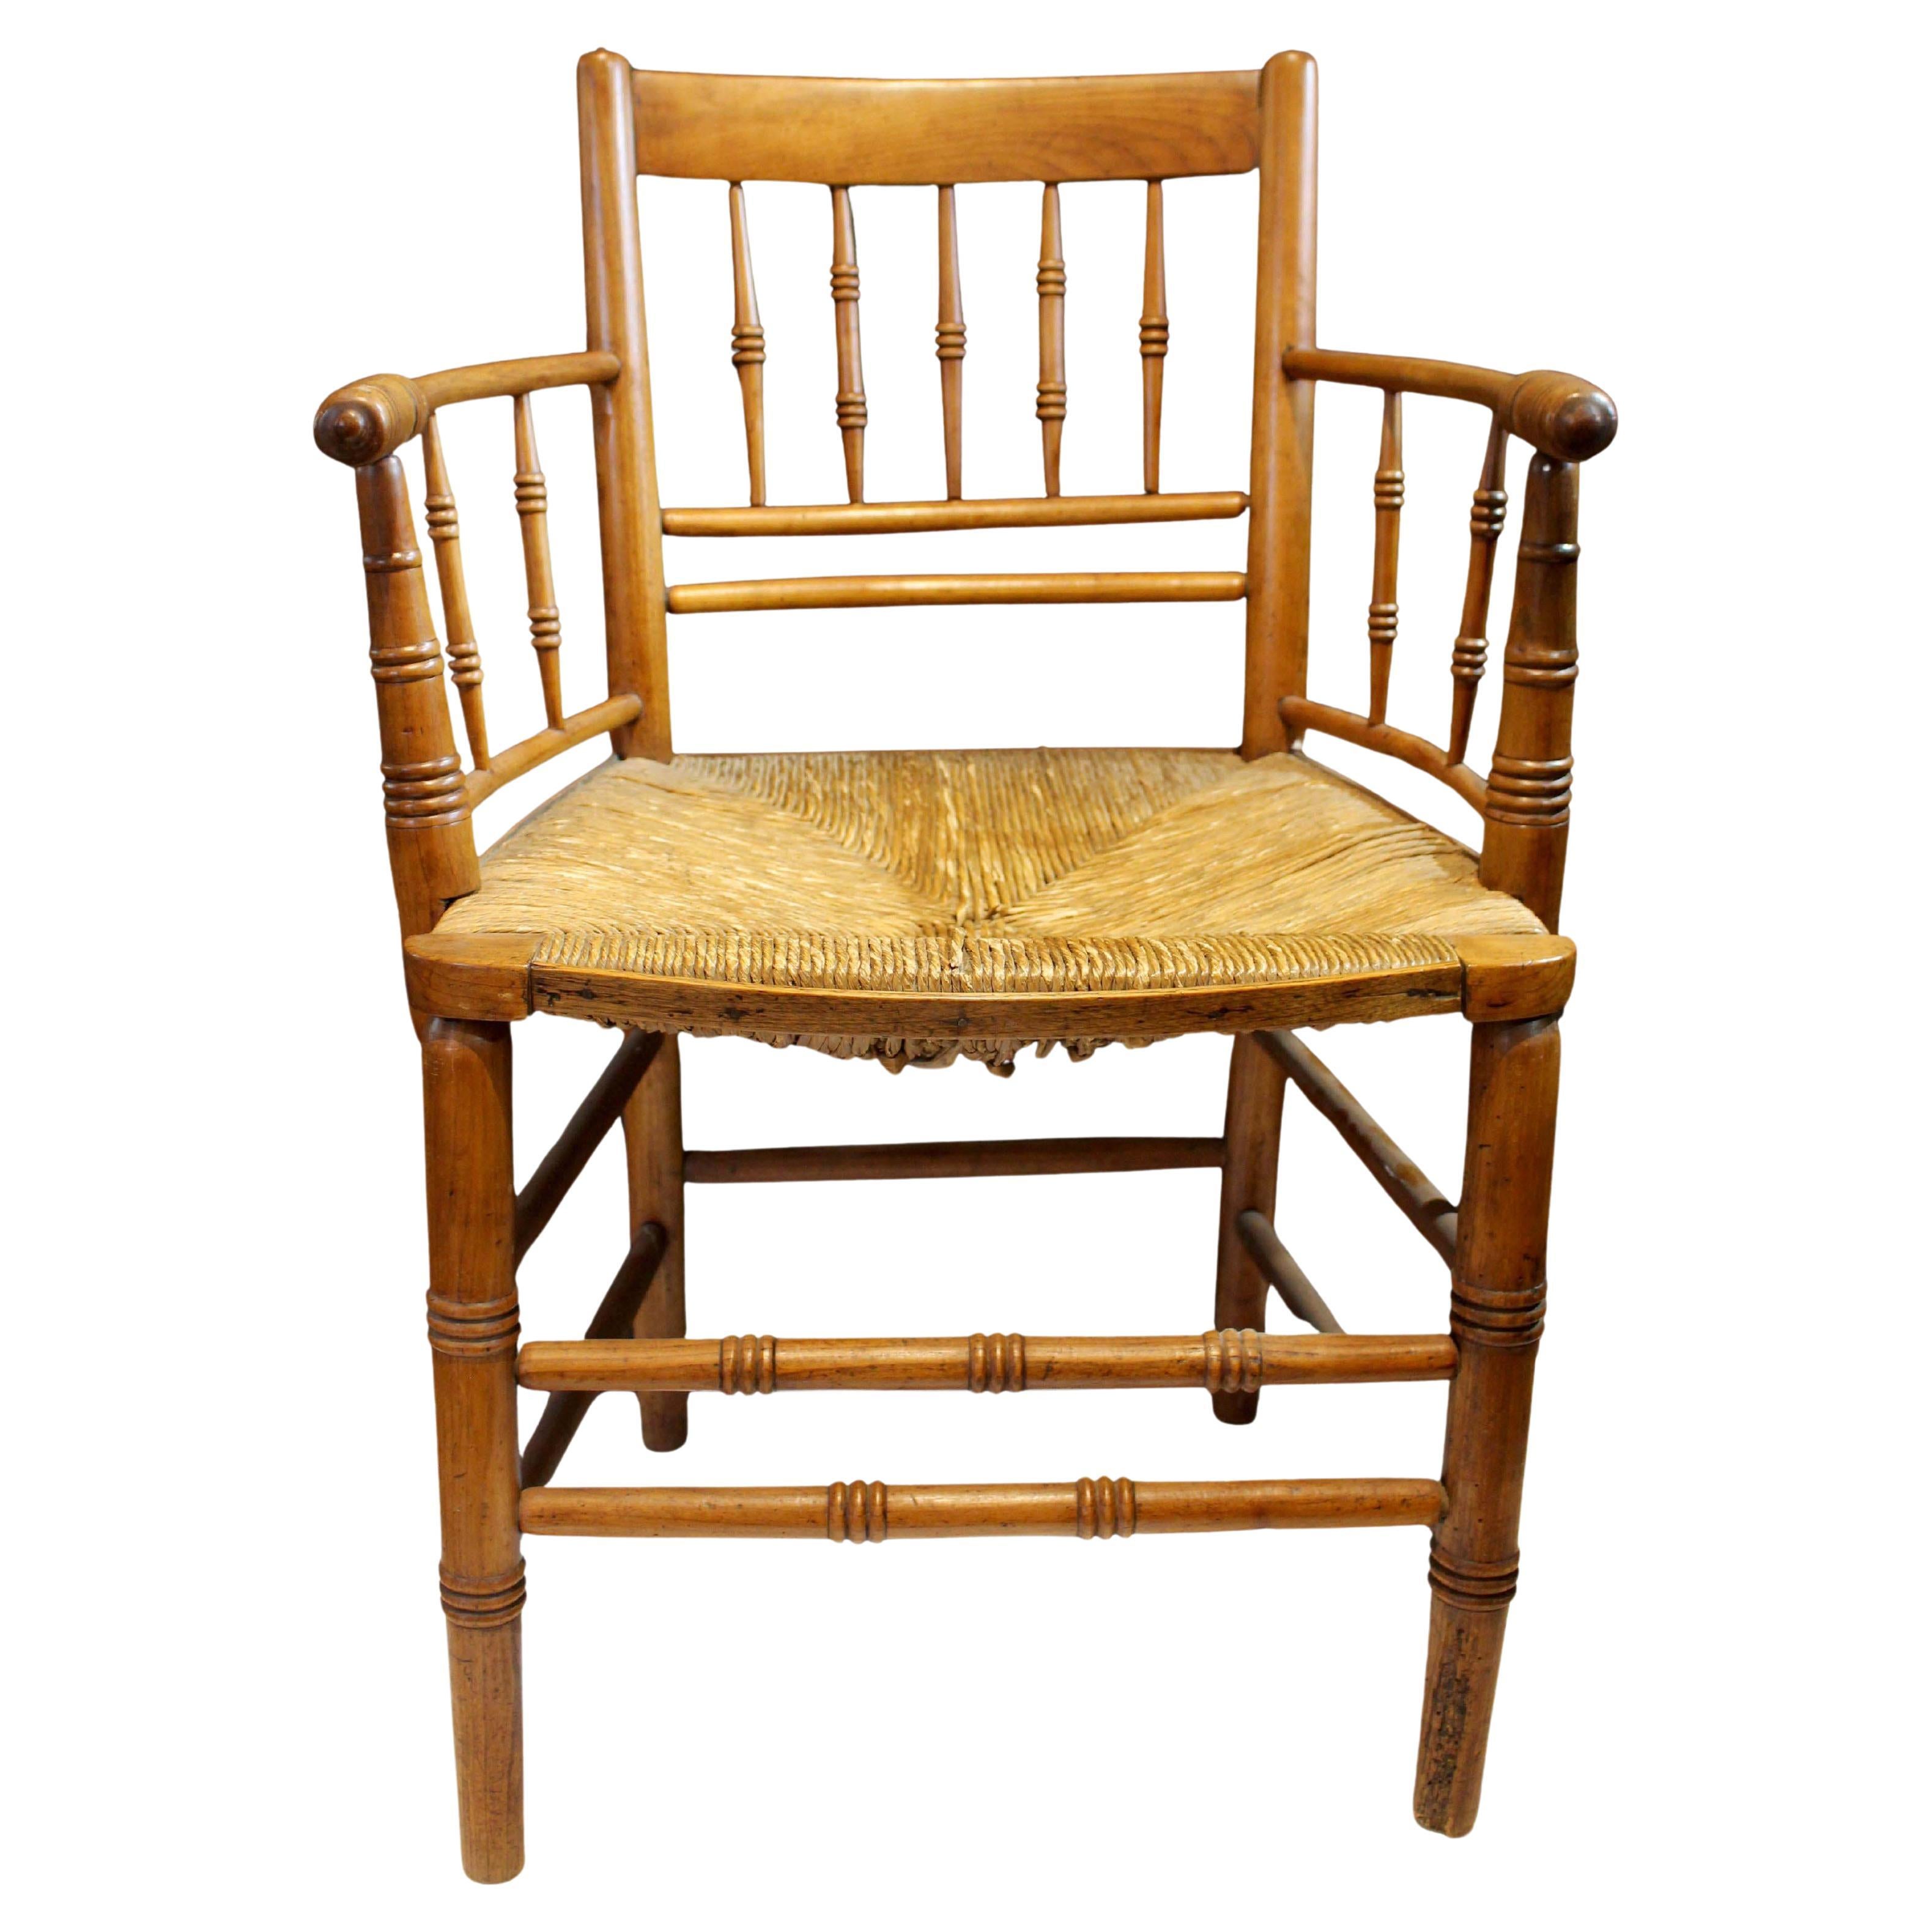 Early 19th Century Fruitwood Arm Chair, English